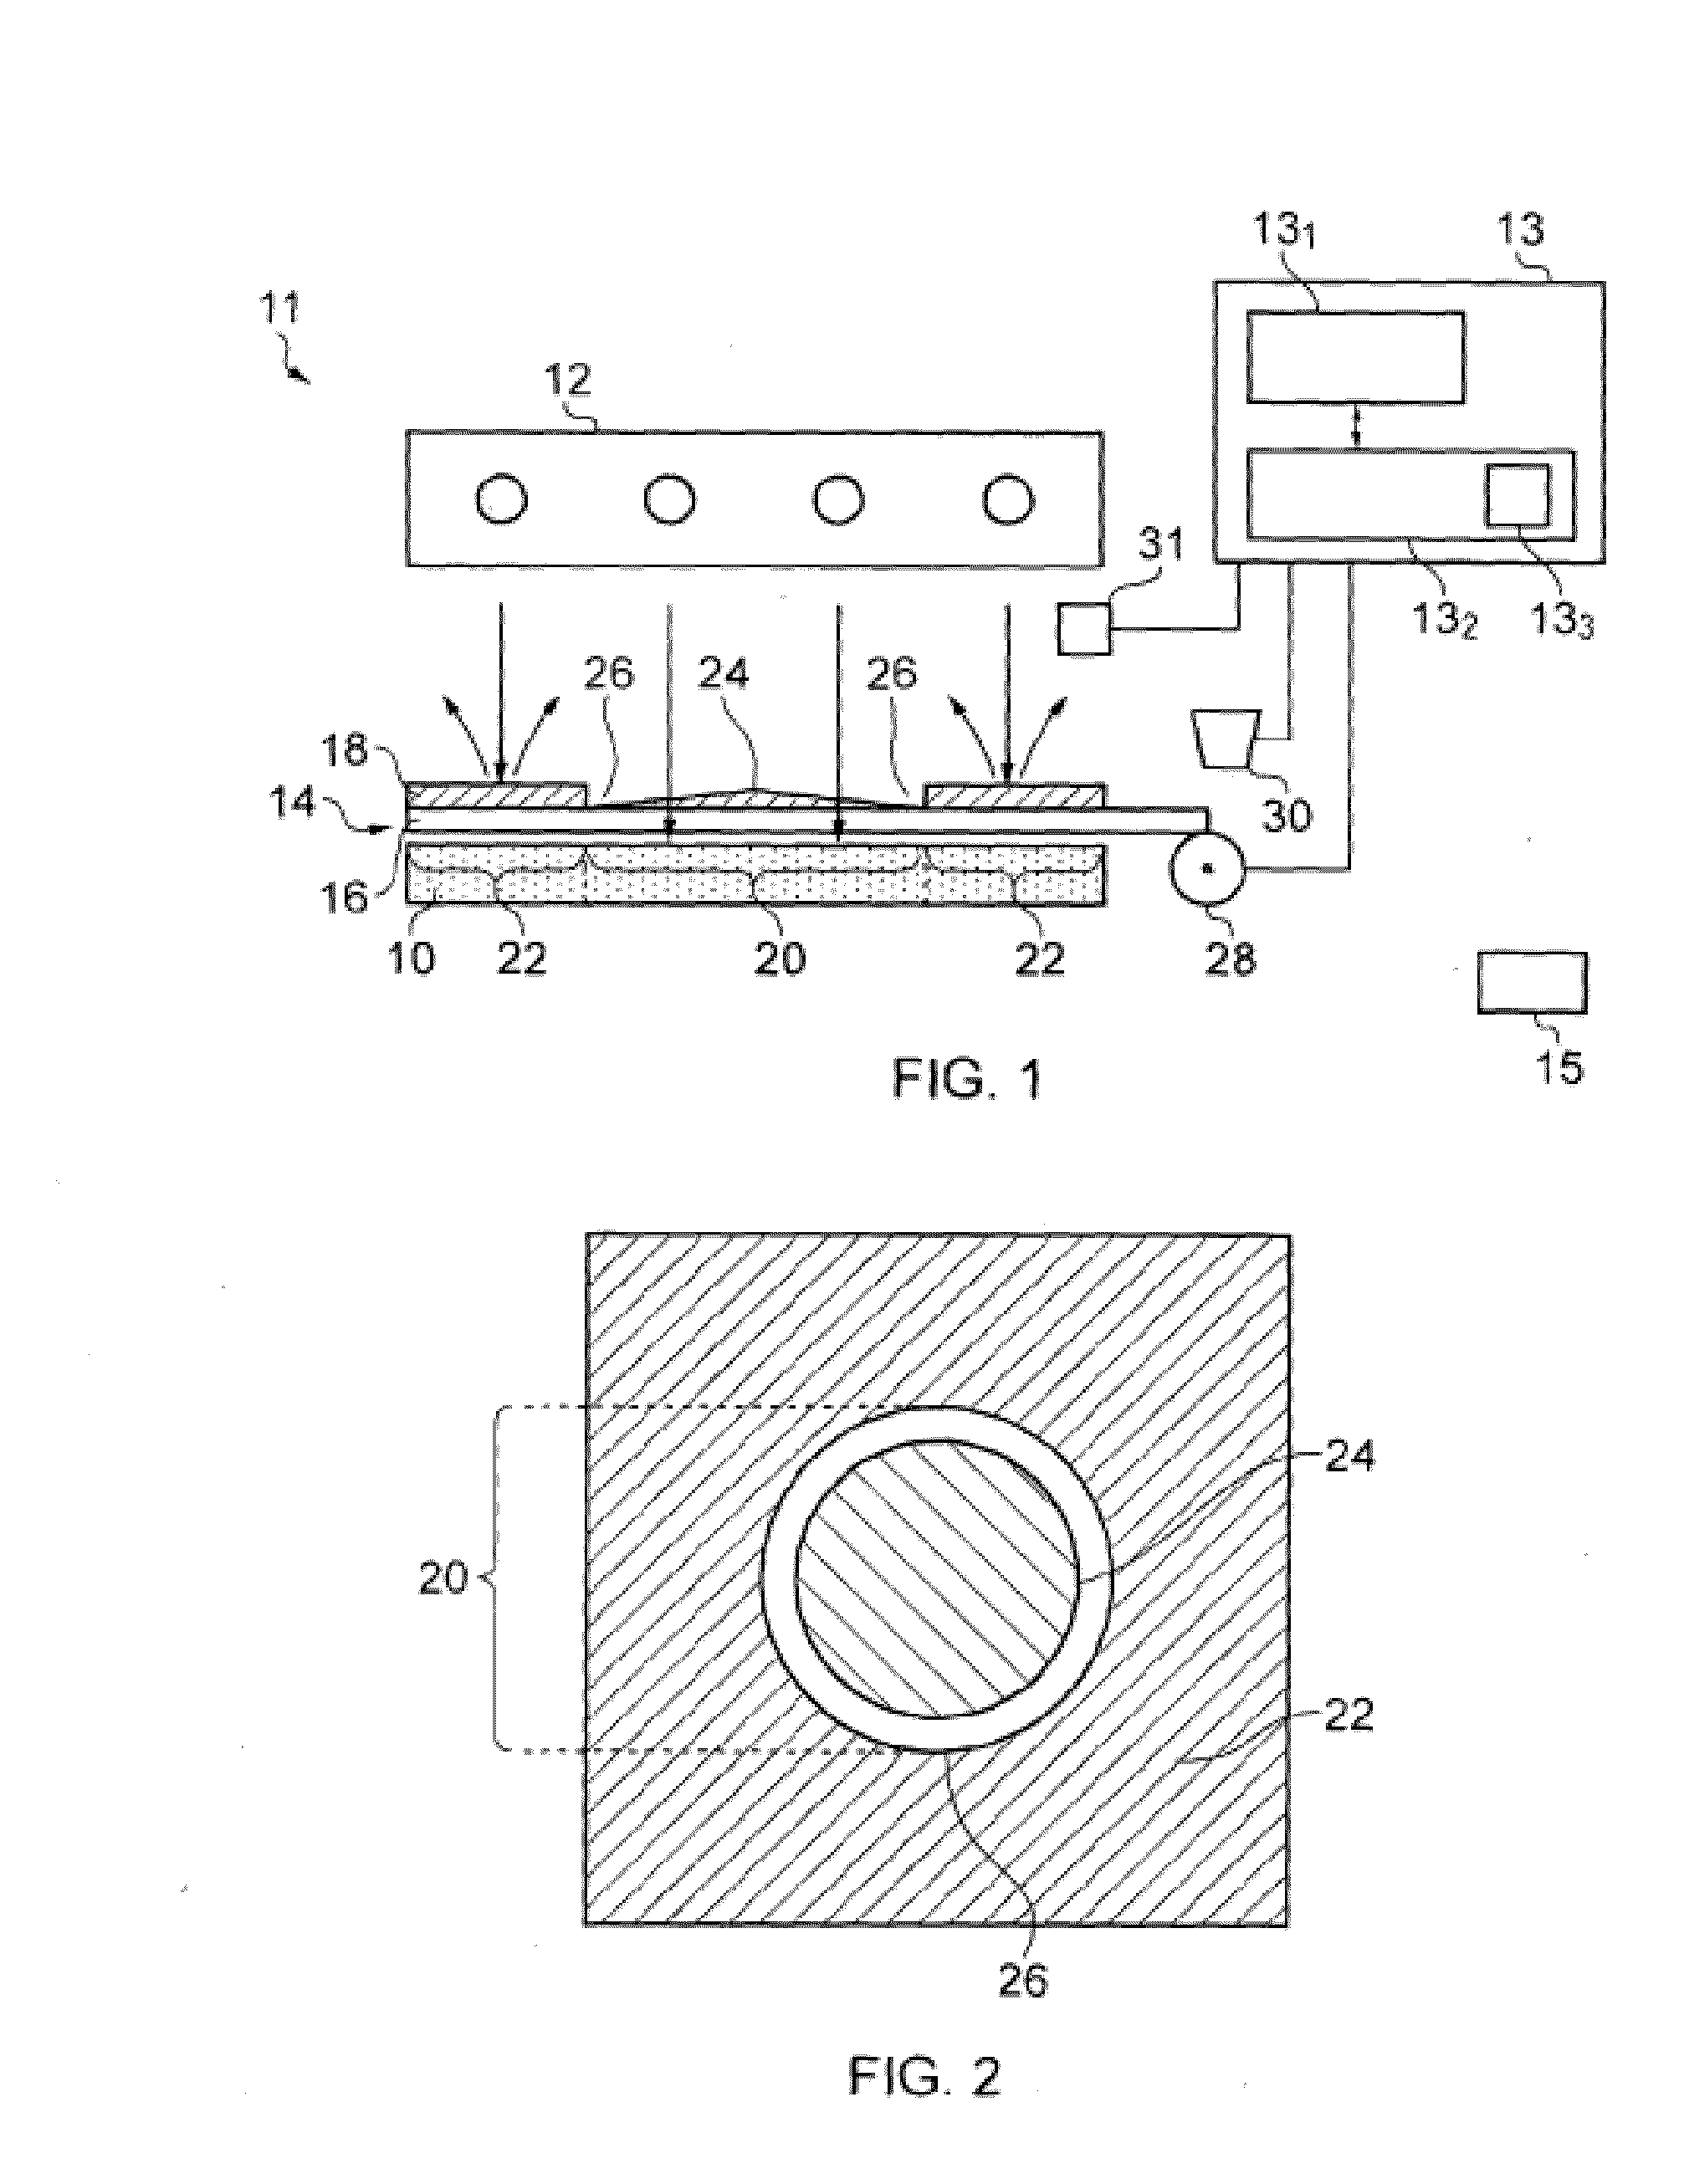 Methods and Apparatus for Selectively Combining Particulate Material